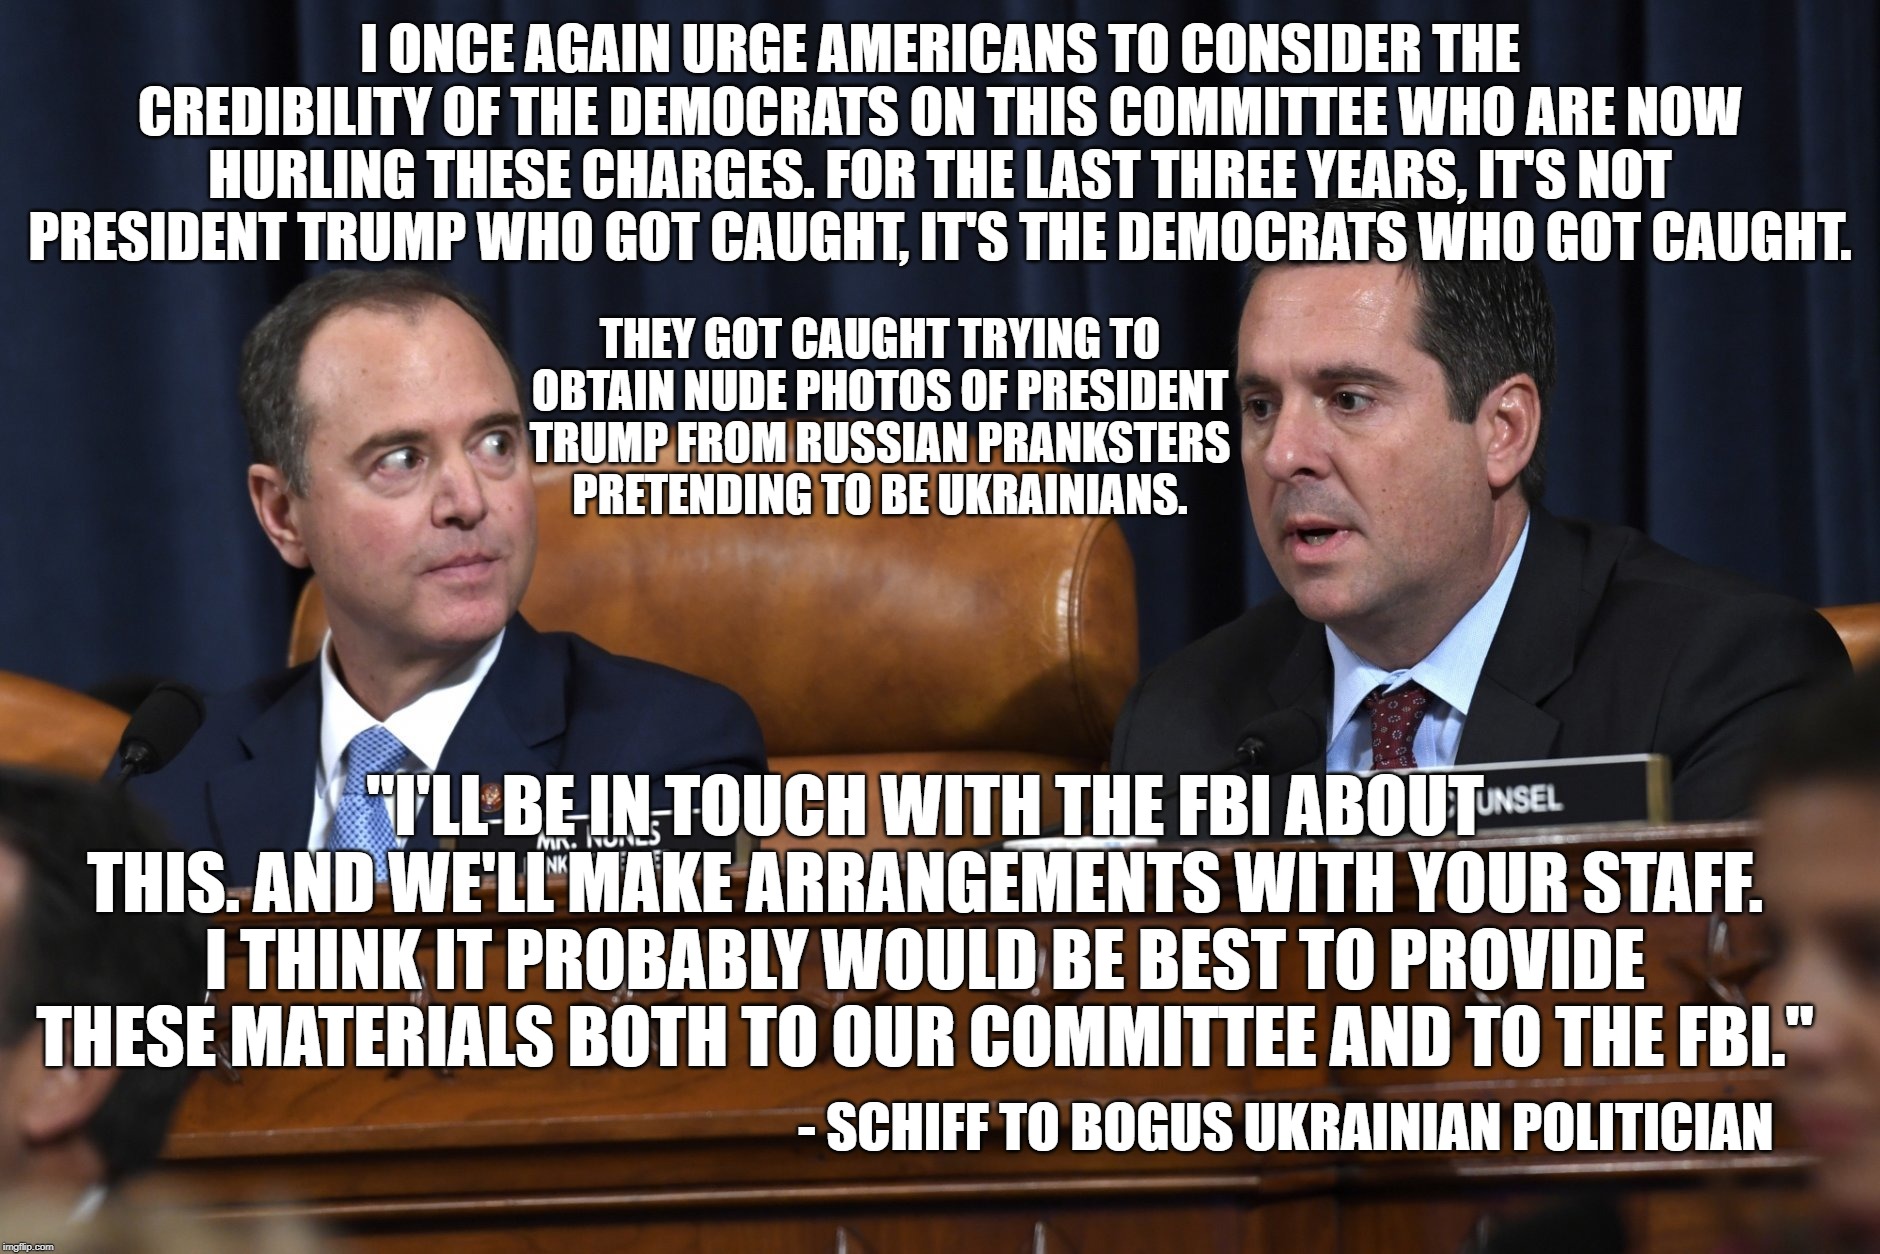 It was shiftless Schiff who tried to conspire with Ukrainians to get dirt on his political opponent. | I ONCE AGAIN URGE AMERICANS TO CONSIDER THE CREDIBILITY OF THE DEMOCRATS ON THIS COMMITTEE WHO ARE NOW HURLING THESE CHARGES. FOR THE LAST THREE YEARS, IT'S NOT PRESIDENT TRUMP WHO GOT CAUGHT, IT'S THE DEMOCRATS WHO GOT CAUGHT. THEY GOT CAUGHT TRYING TO OBTAIN NUDE PHOTOS OF PRESIDENT TRUMP FROM RUSSIAN PRANKSTERS PRETENDING TO BE UKRAINIANS. "I'LL BE IN TOUCH WITH THE FBI ABOUT THIS. AND WE'LL MAKE ARRANGEMENTS WITH YOUR STAFF. I THINK IT PROBABLY WOULD BE BEST TO PROVIDE THESE MATERIALS BOTH TO OUR COMMITTEE AND TO THE FBI."; - SCHIFF TO BOGUS UKRAINIAN POLITICIAN | image tagged in schiff sleazeball,impeachment fraud,impeachment hoax,impeachment boondoggle,waste of taxpayers' money | made w/ Imgflip meme maker